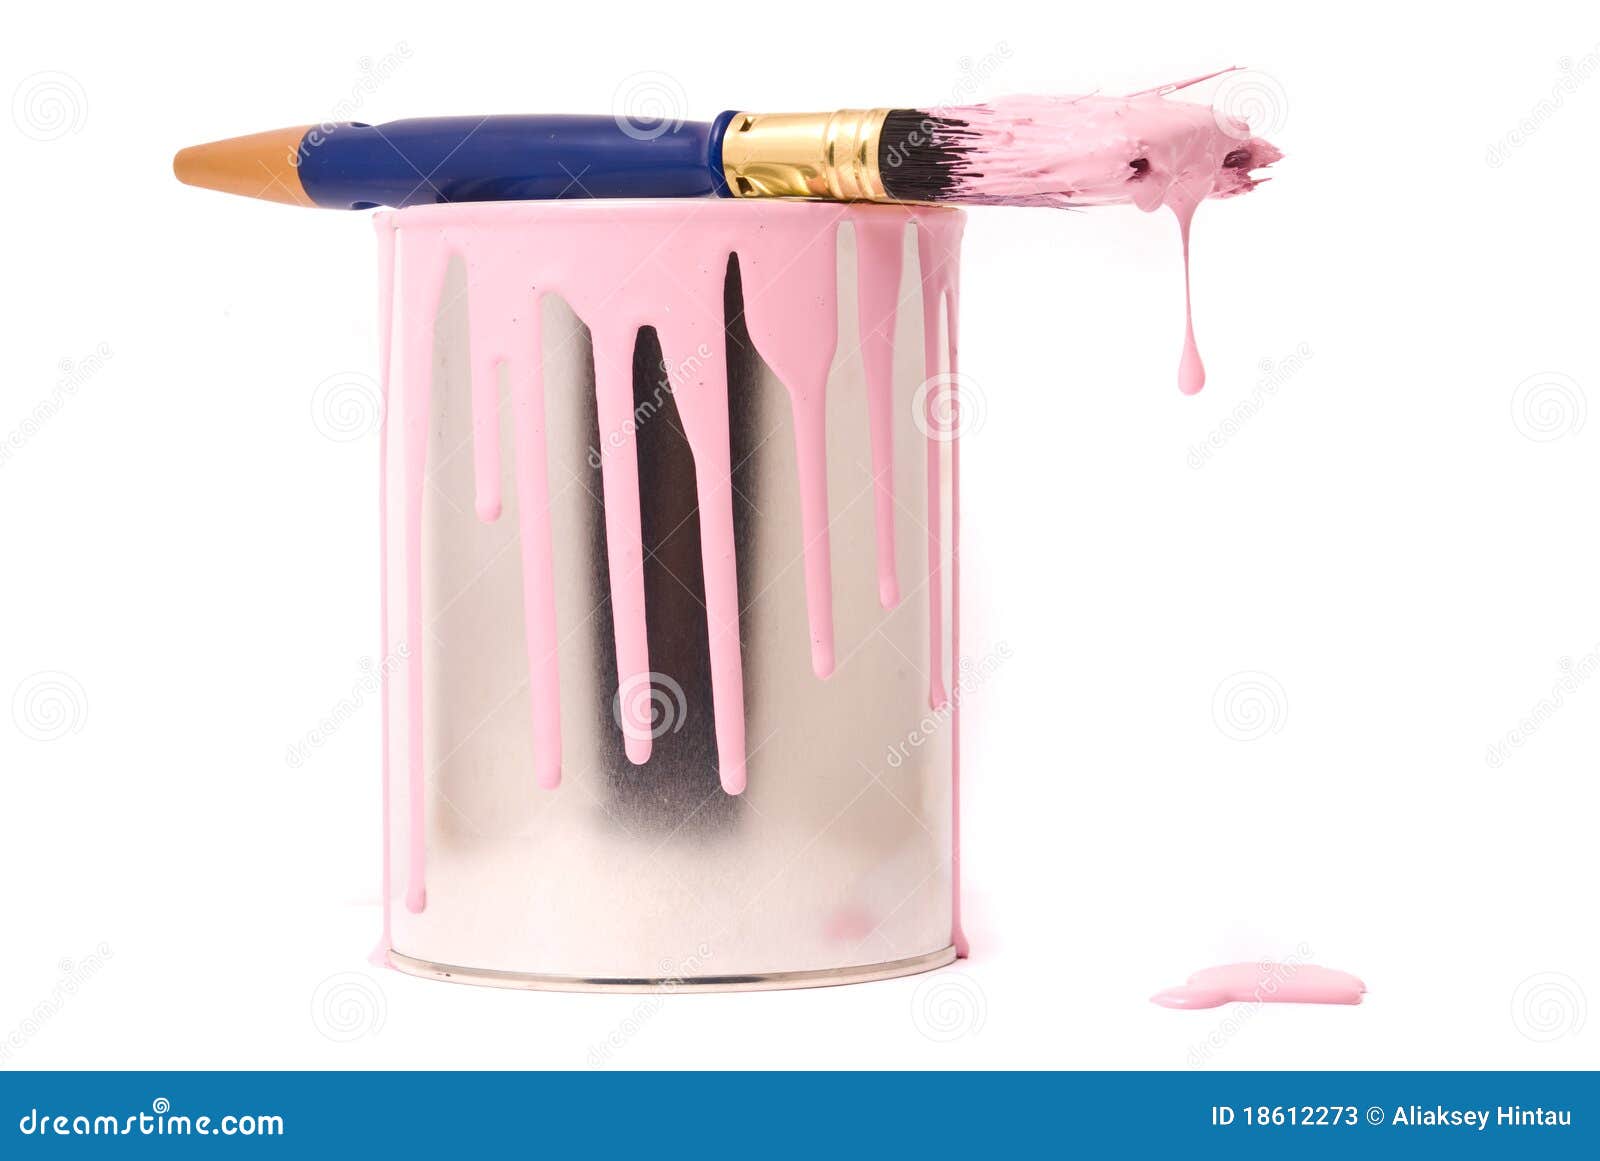 can-pink-paint-18612273.jpg